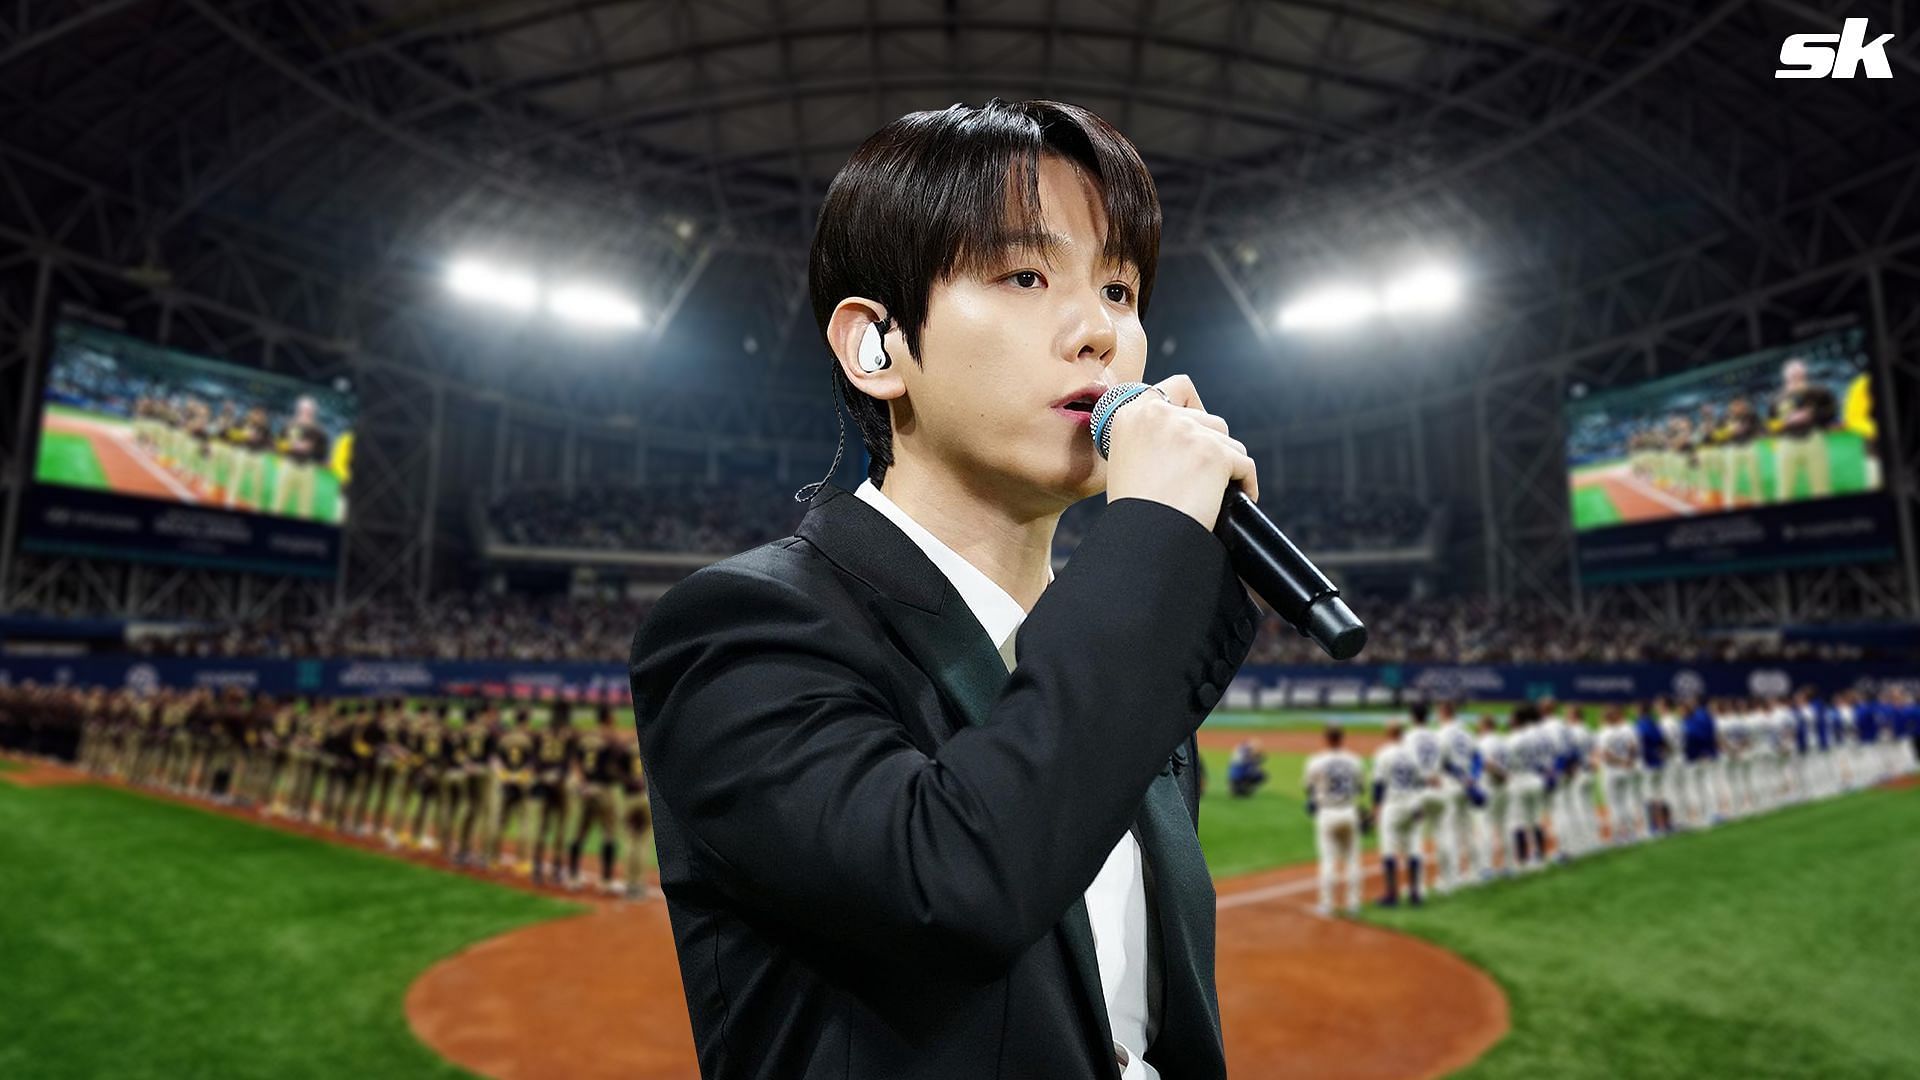 &quot;Finally figuring out how to attract non-baseball fans&quot; - MLB fans react as K-Pop star Baek Hyun wows crowd with national anthem singing act